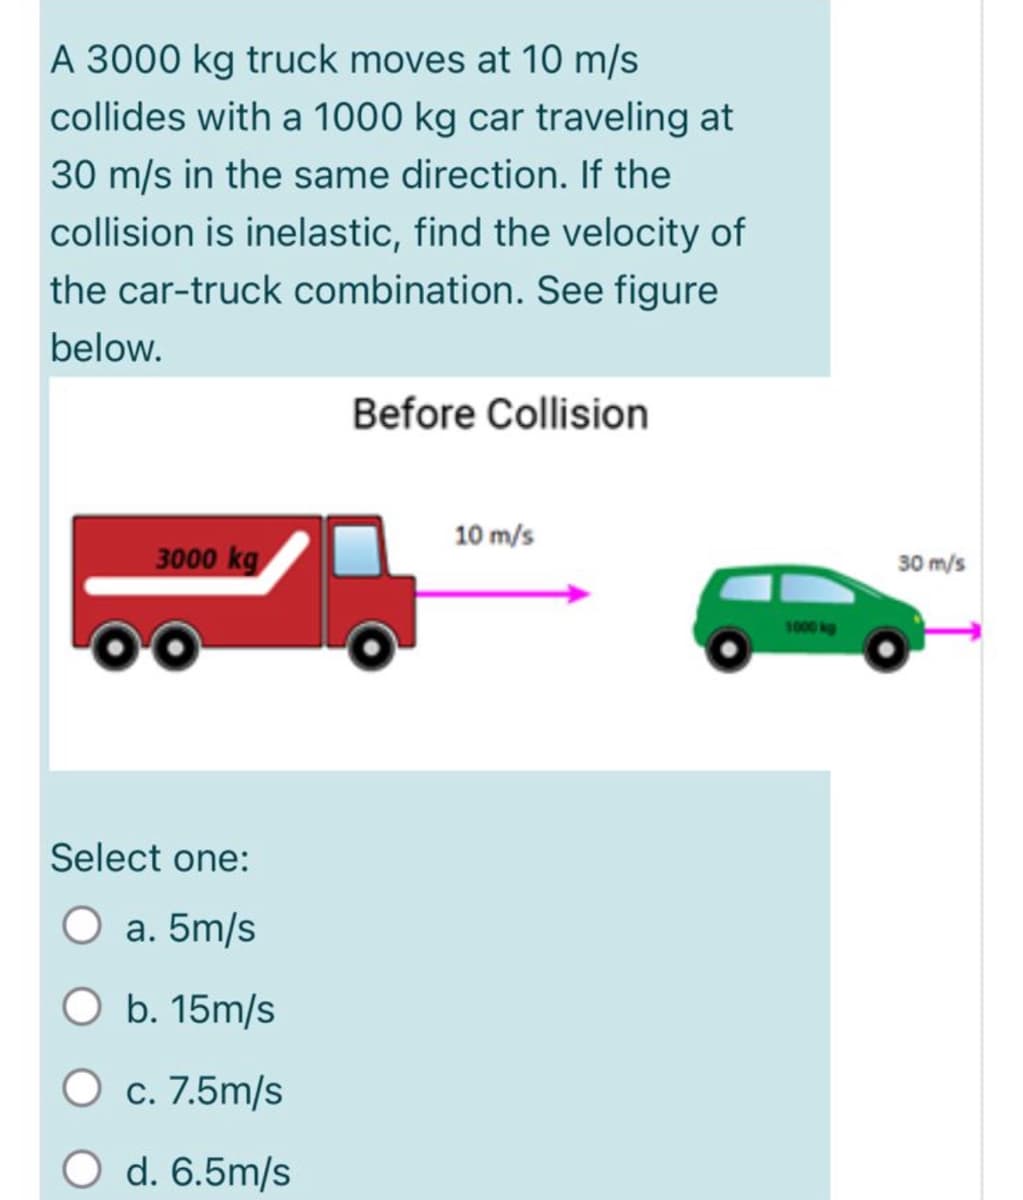 A 3000 kg truck moves at 10 m/s
collides with a 1000 kg car traveling at
30 m/s in the same direction. If the
collision is inelastic, find the velocity of
the car-truck combination. See figure
below.
Before Collision
10 m/s
3000 kg
30 m/s
1000 kg
Select one:
O a. 5m/s
O b. 15m/s
c. 7.5m/s
d. 6.5m/s
